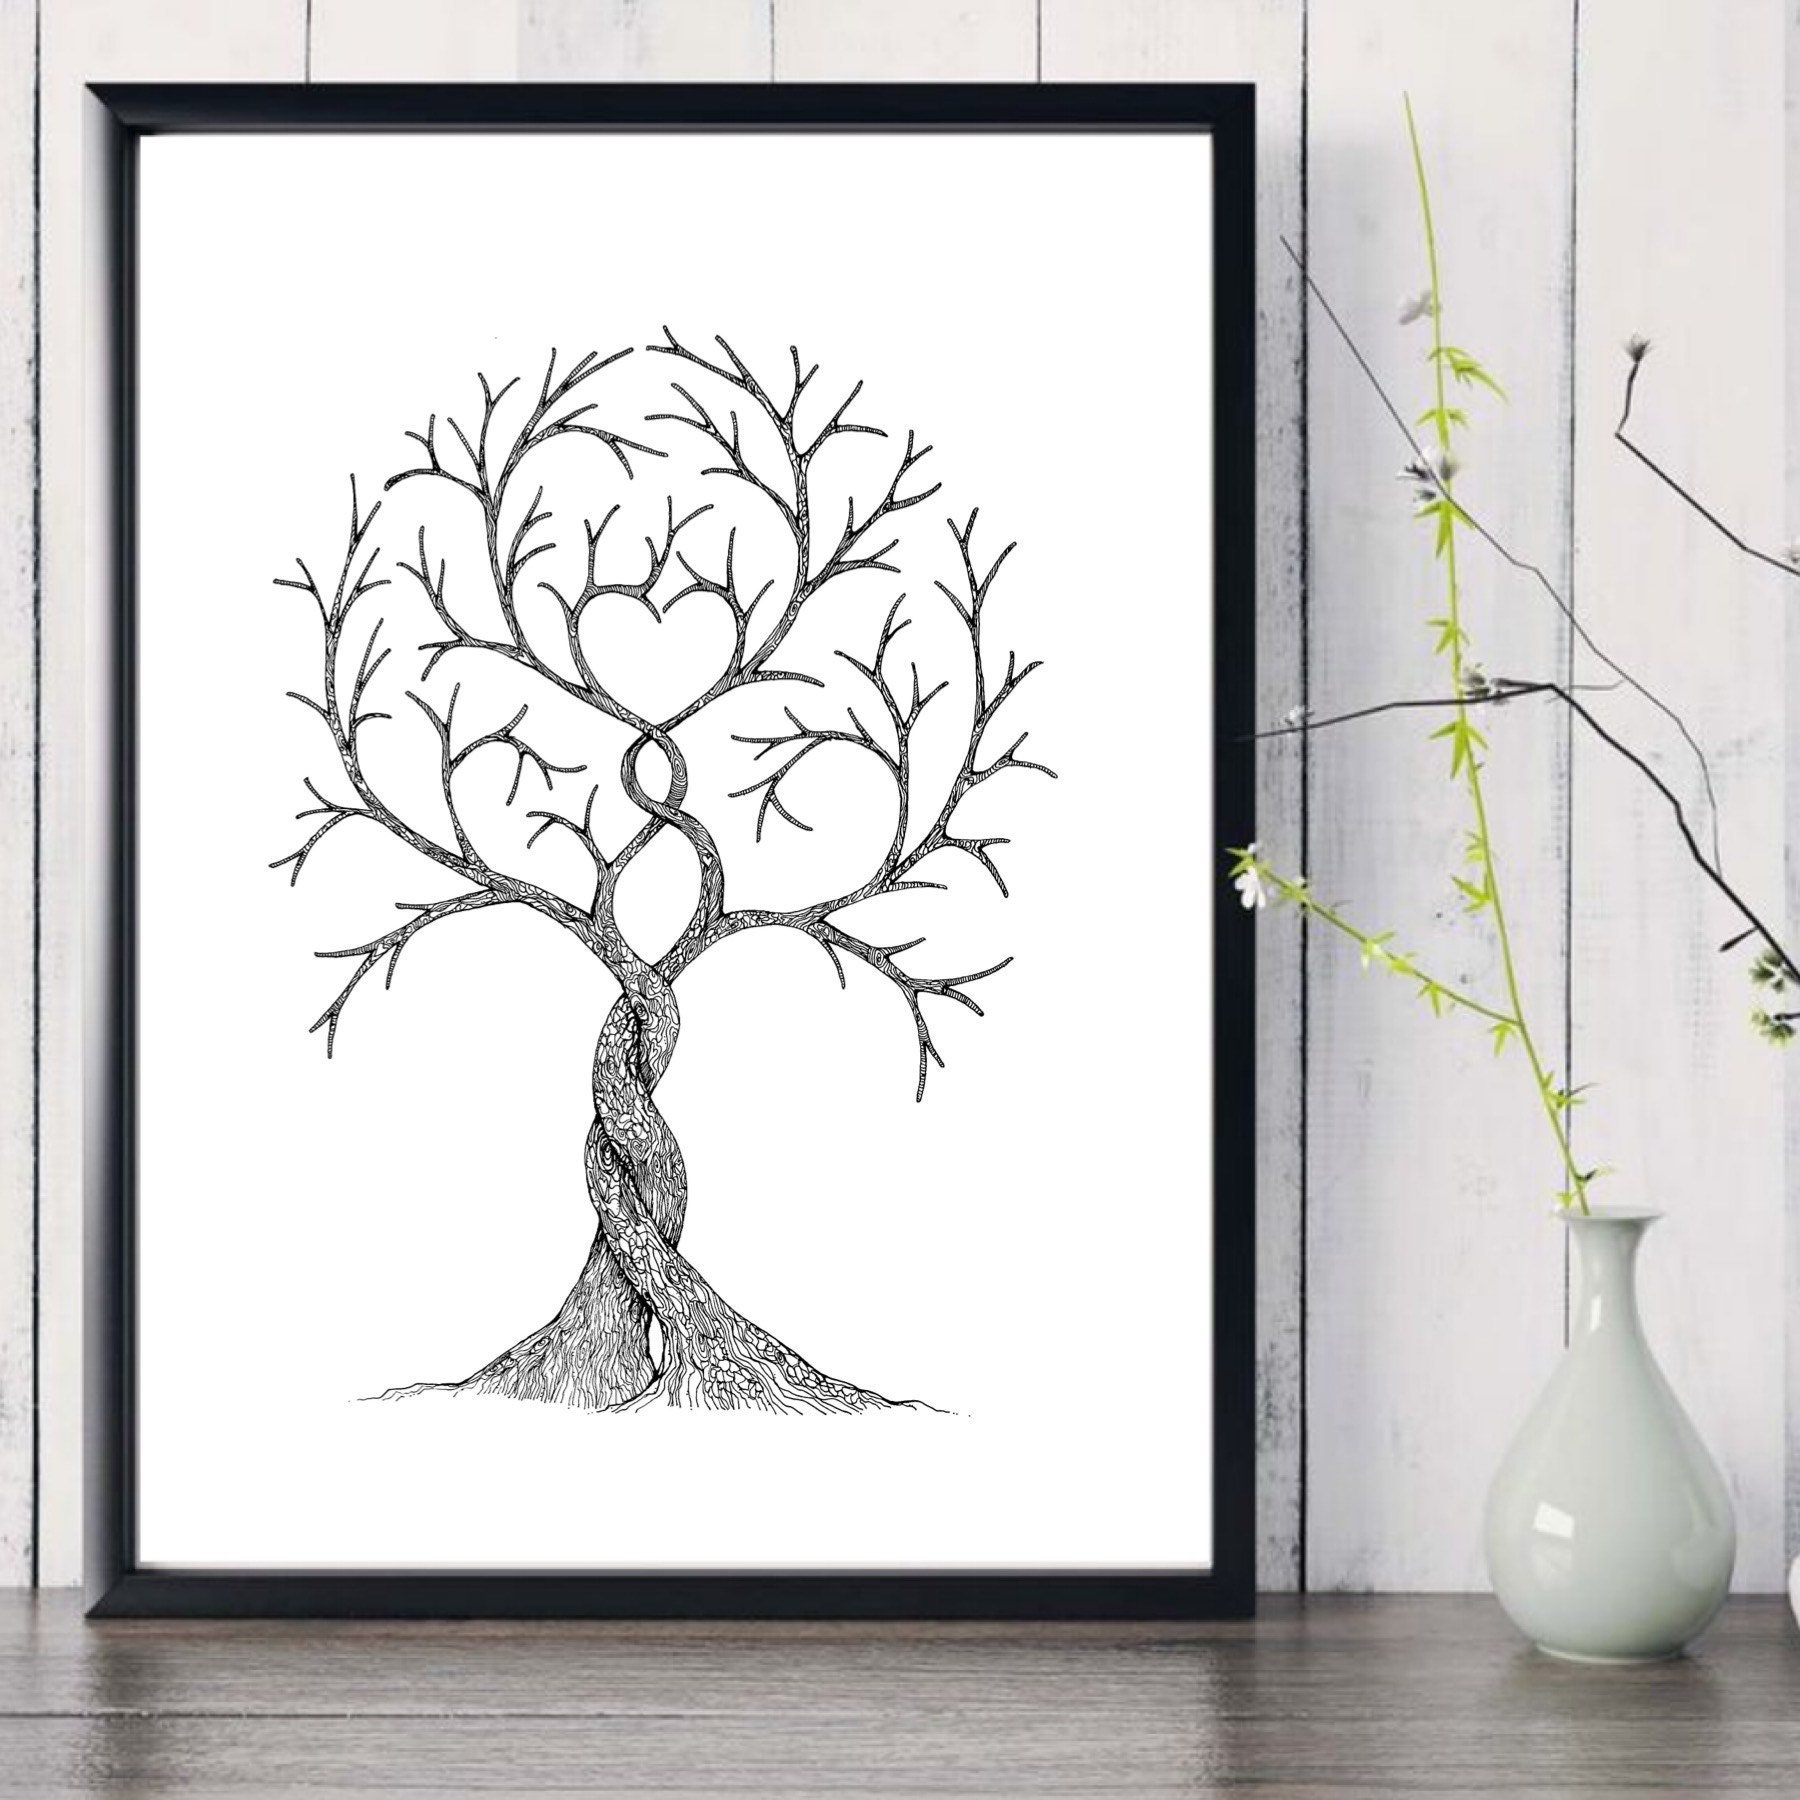 Colorful Tree Sketch print on a 12x12 inch square Wall Frame